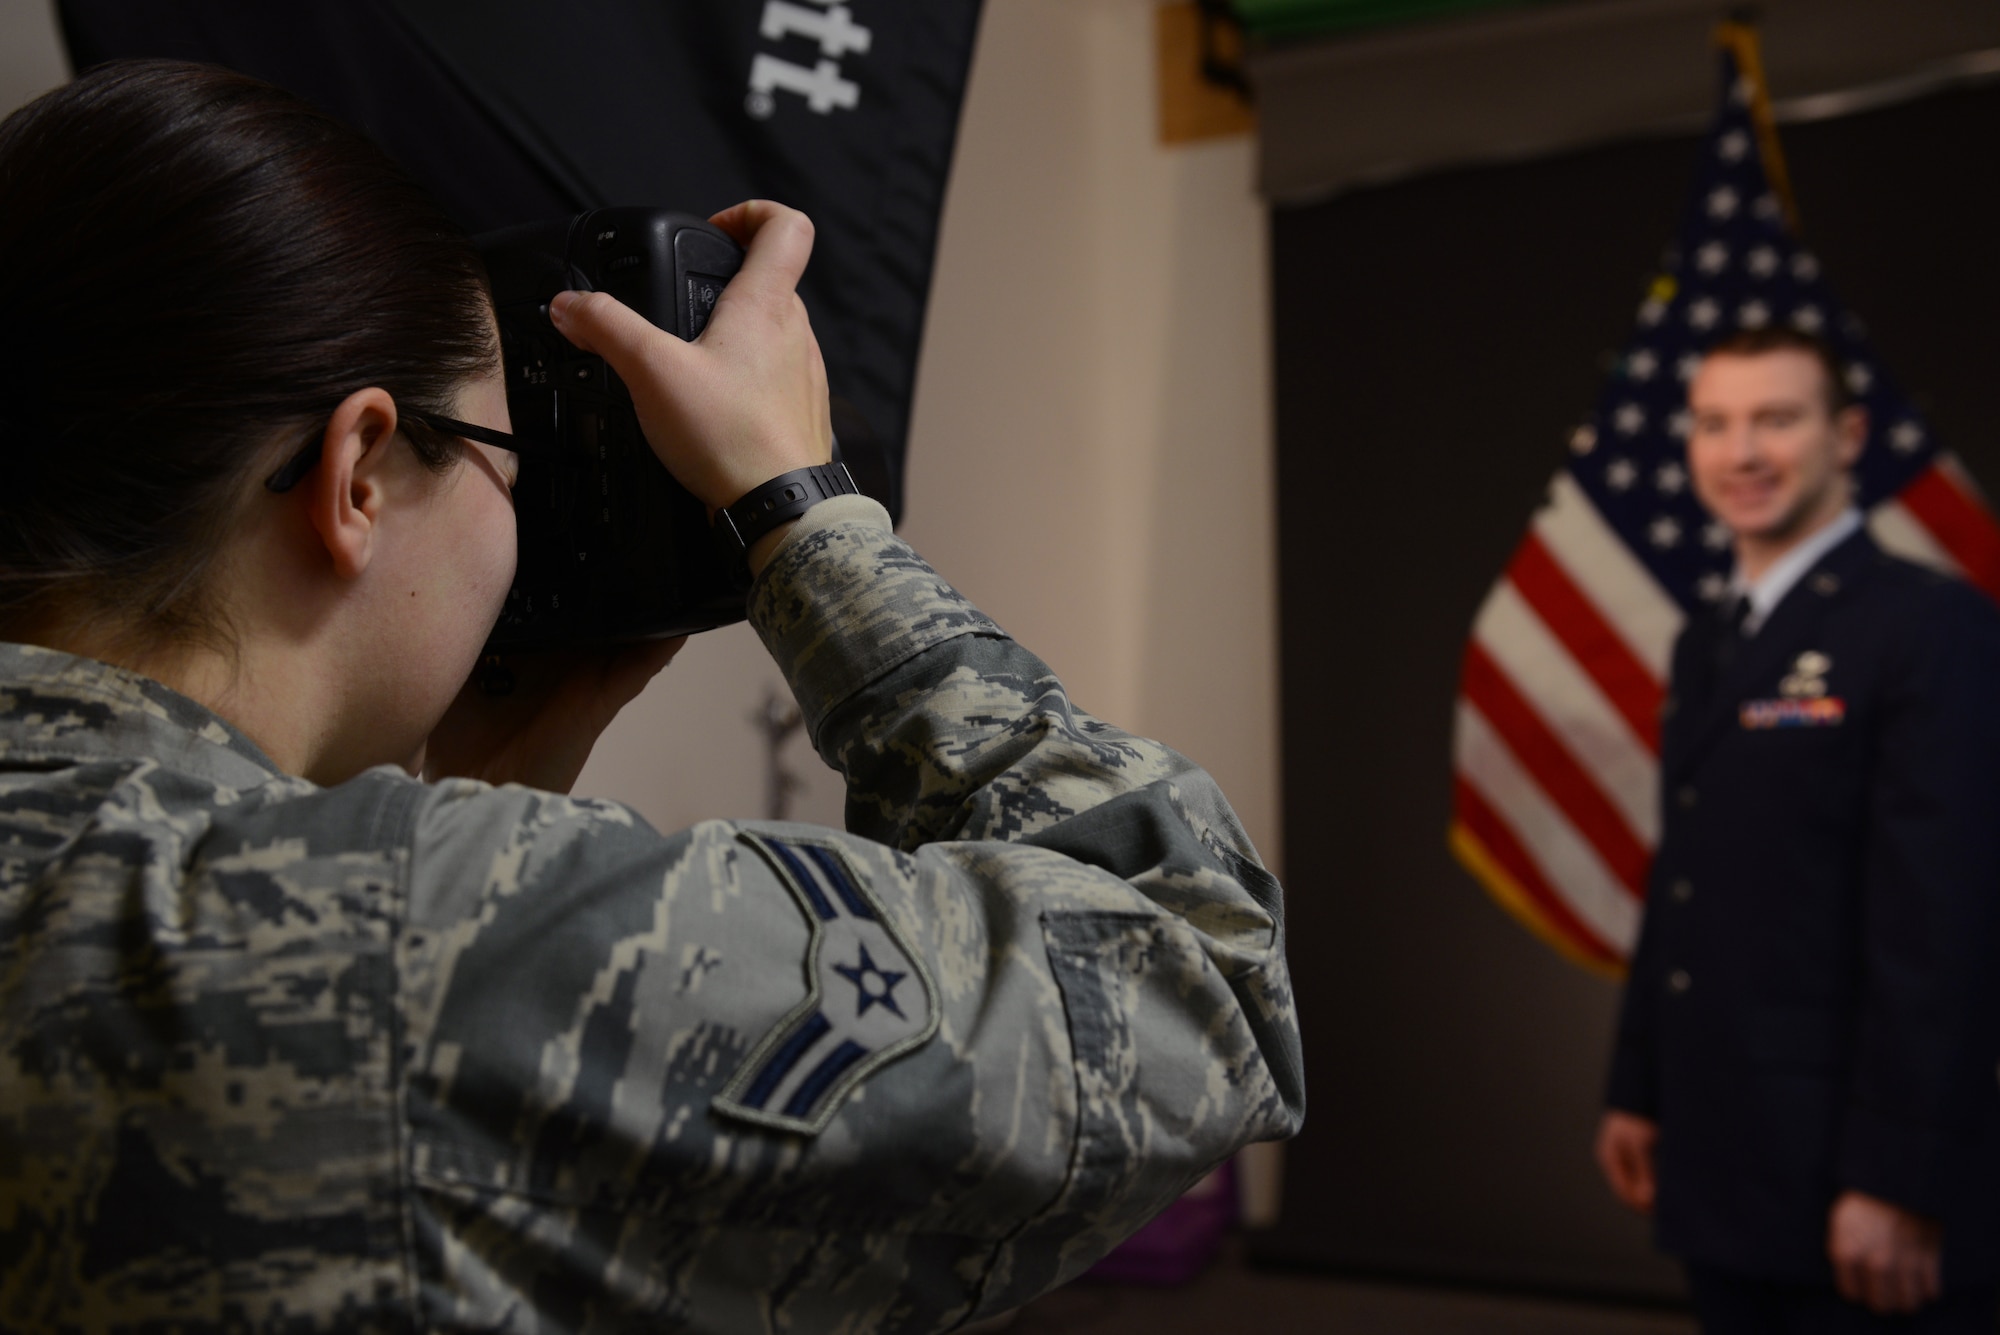 U.S. Air Force Airman 1st Class Cassandra Whitman, a 354th Fighter Wing public affairs photojournalist, takes a studio photo Dec. 22, 2015, at Eielson Air Force Base, Alaska. Whitman is approaching the one year mark in the Air Force and reflected on how her decision to join the military has positively affected her life. (U.S. Air Force photo by Senior Airman Ashley Nicole Taylor/Released)